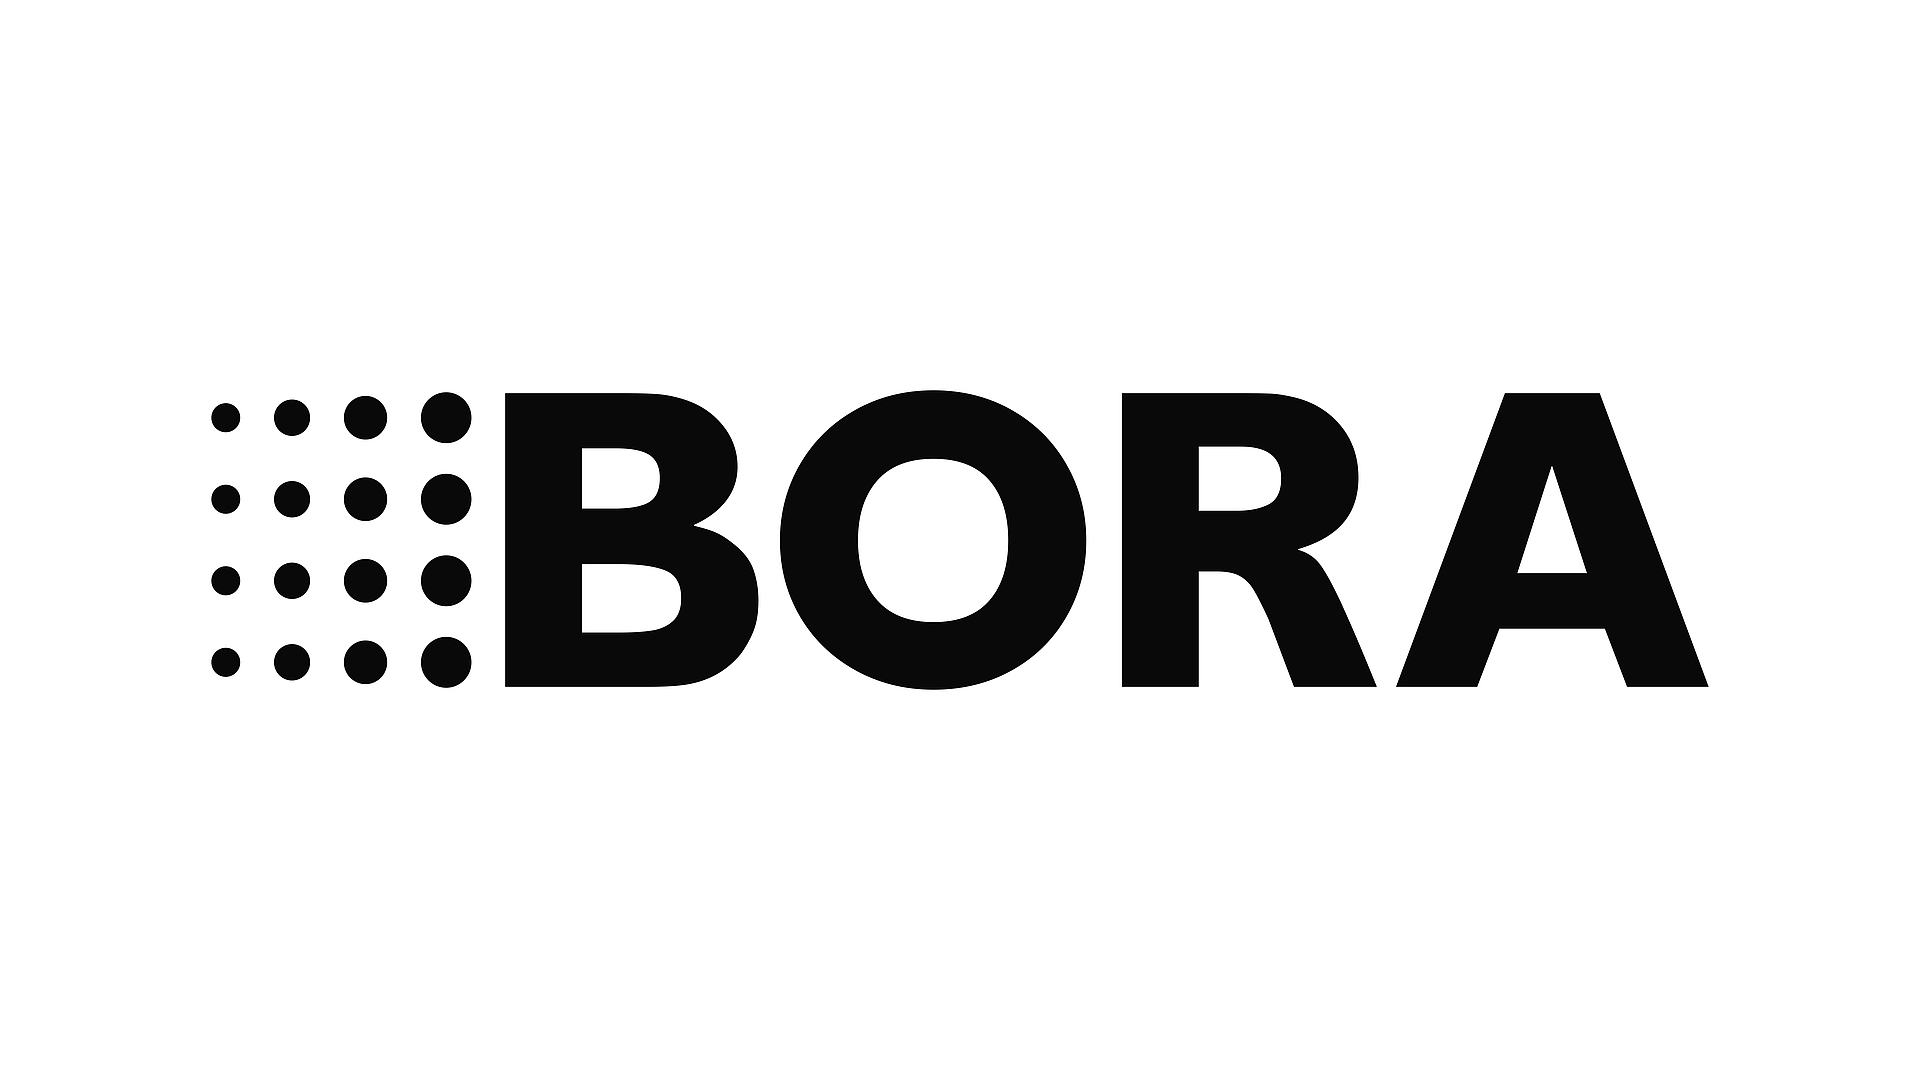 BORA facts and figures